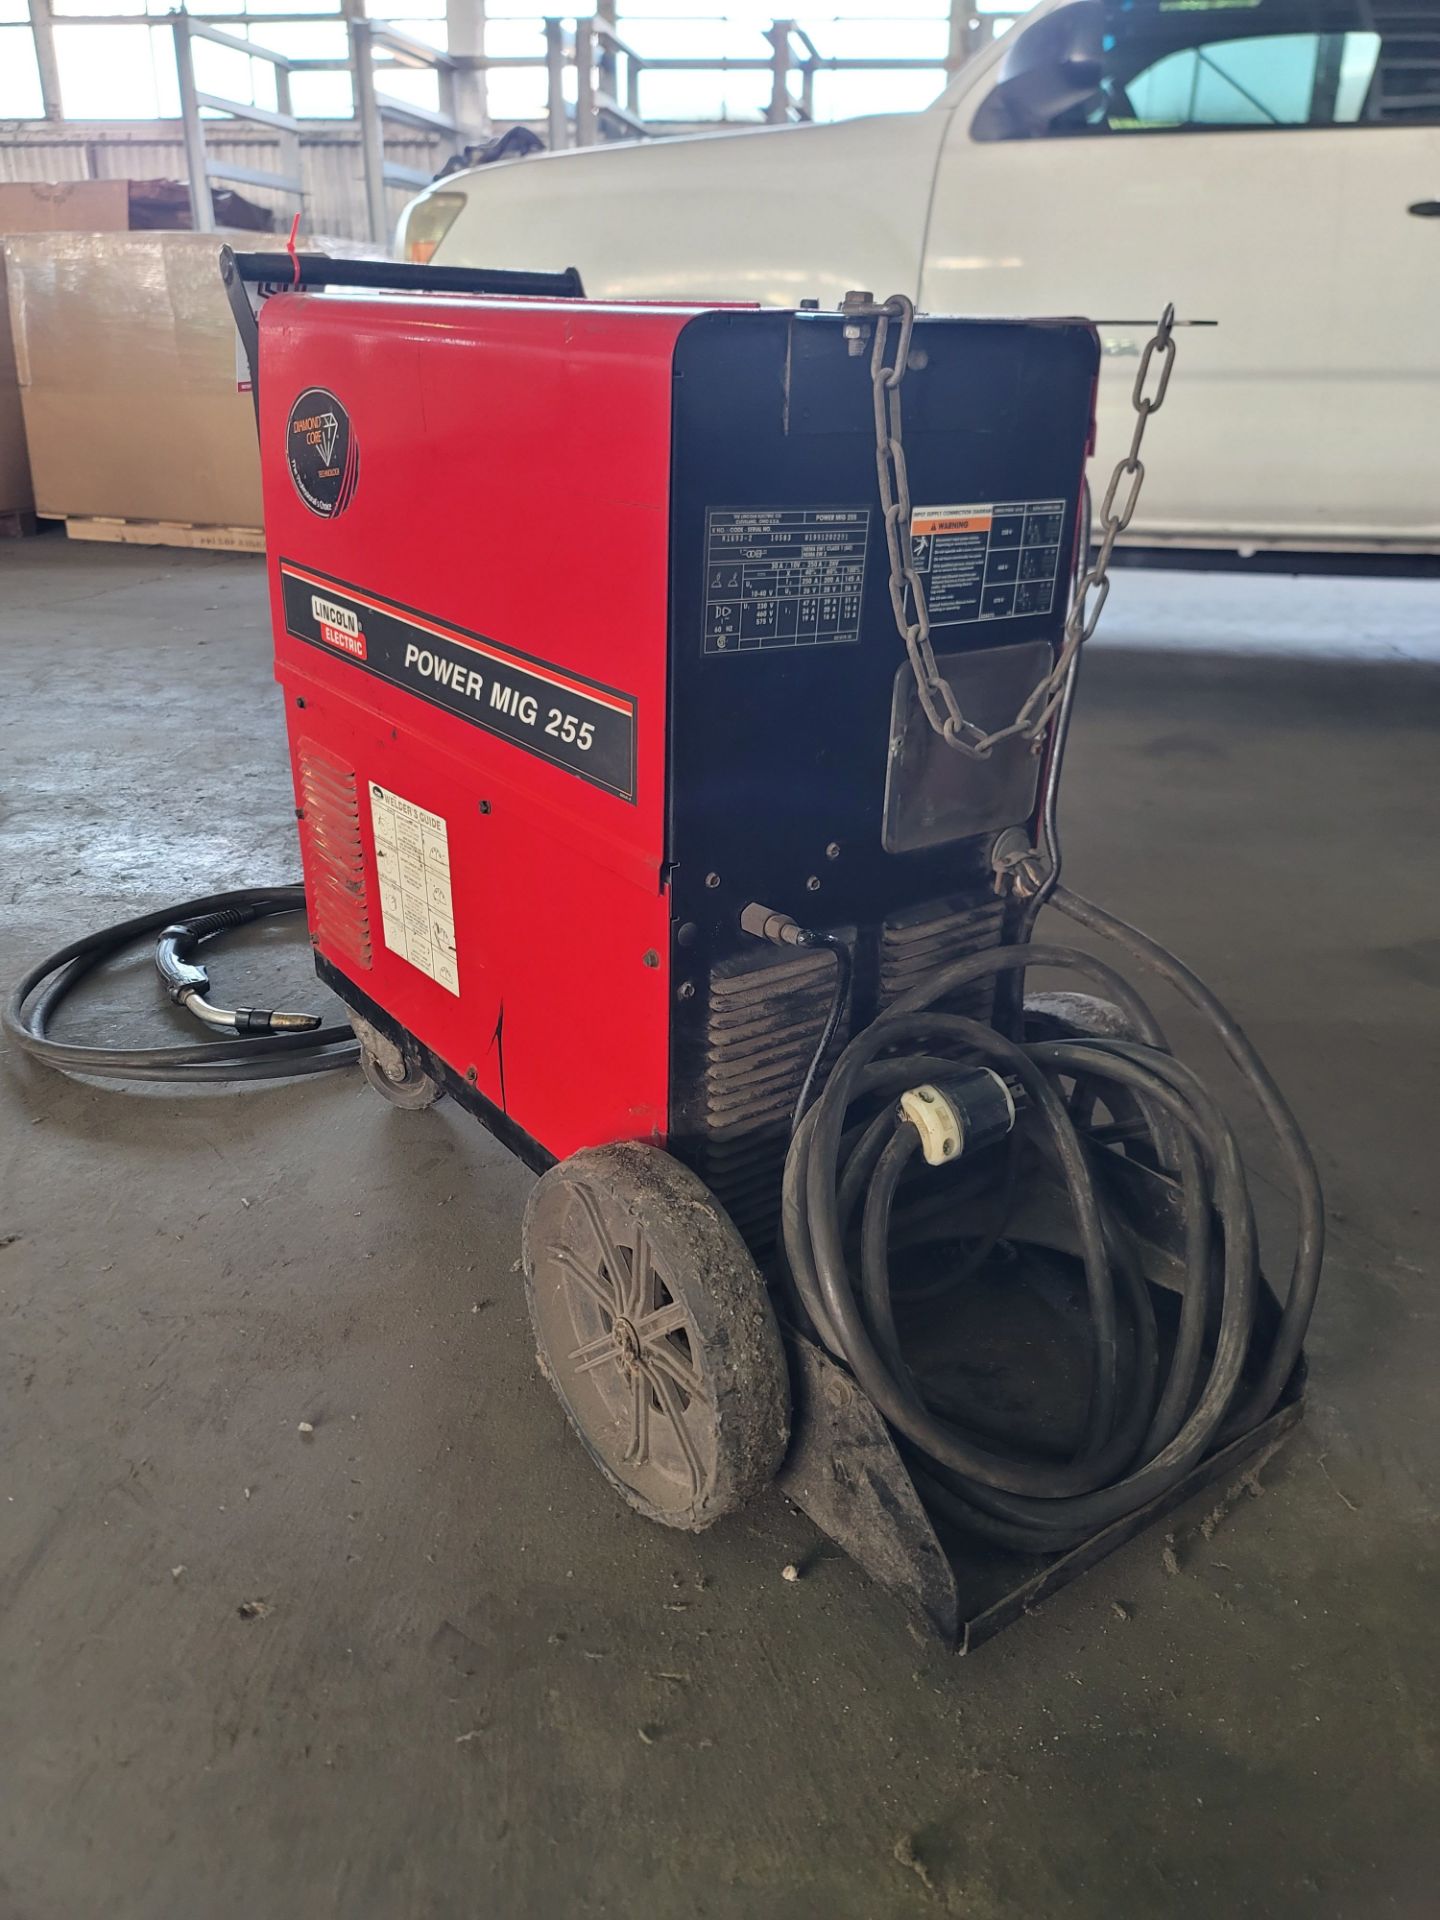 LINCOLN ELECTRIC POWER MIG 255 WELDER, K1693-2, S/N U1991202291, TANK IS NOT INCLUDED - Image 3 of 4